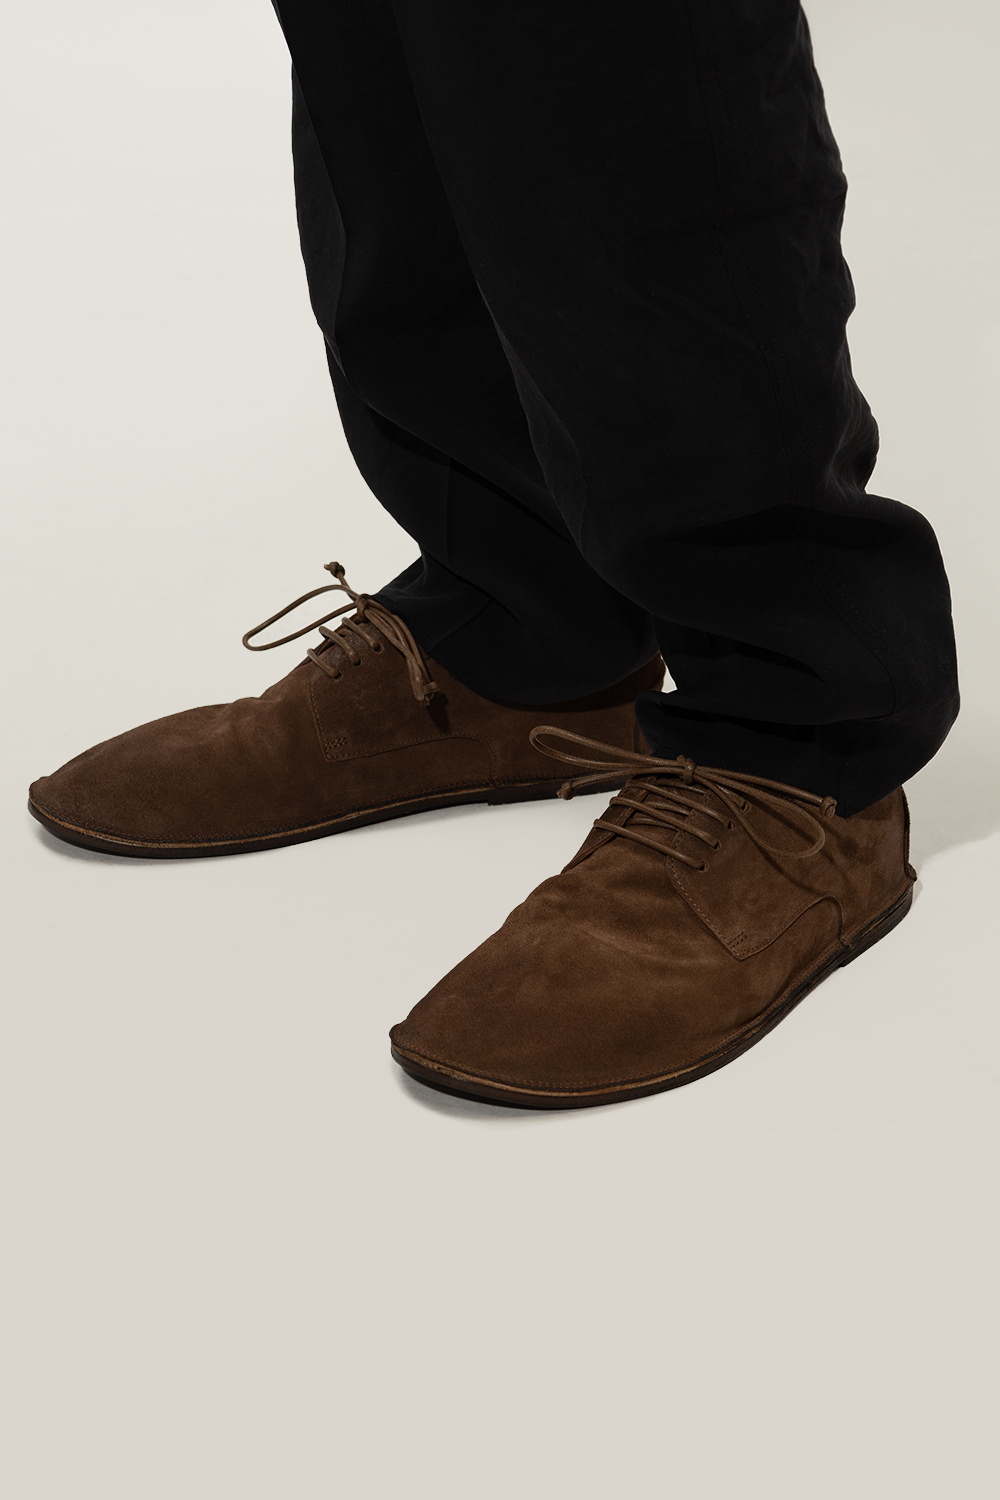 Marsell ‘Strasacco’ leather shoes